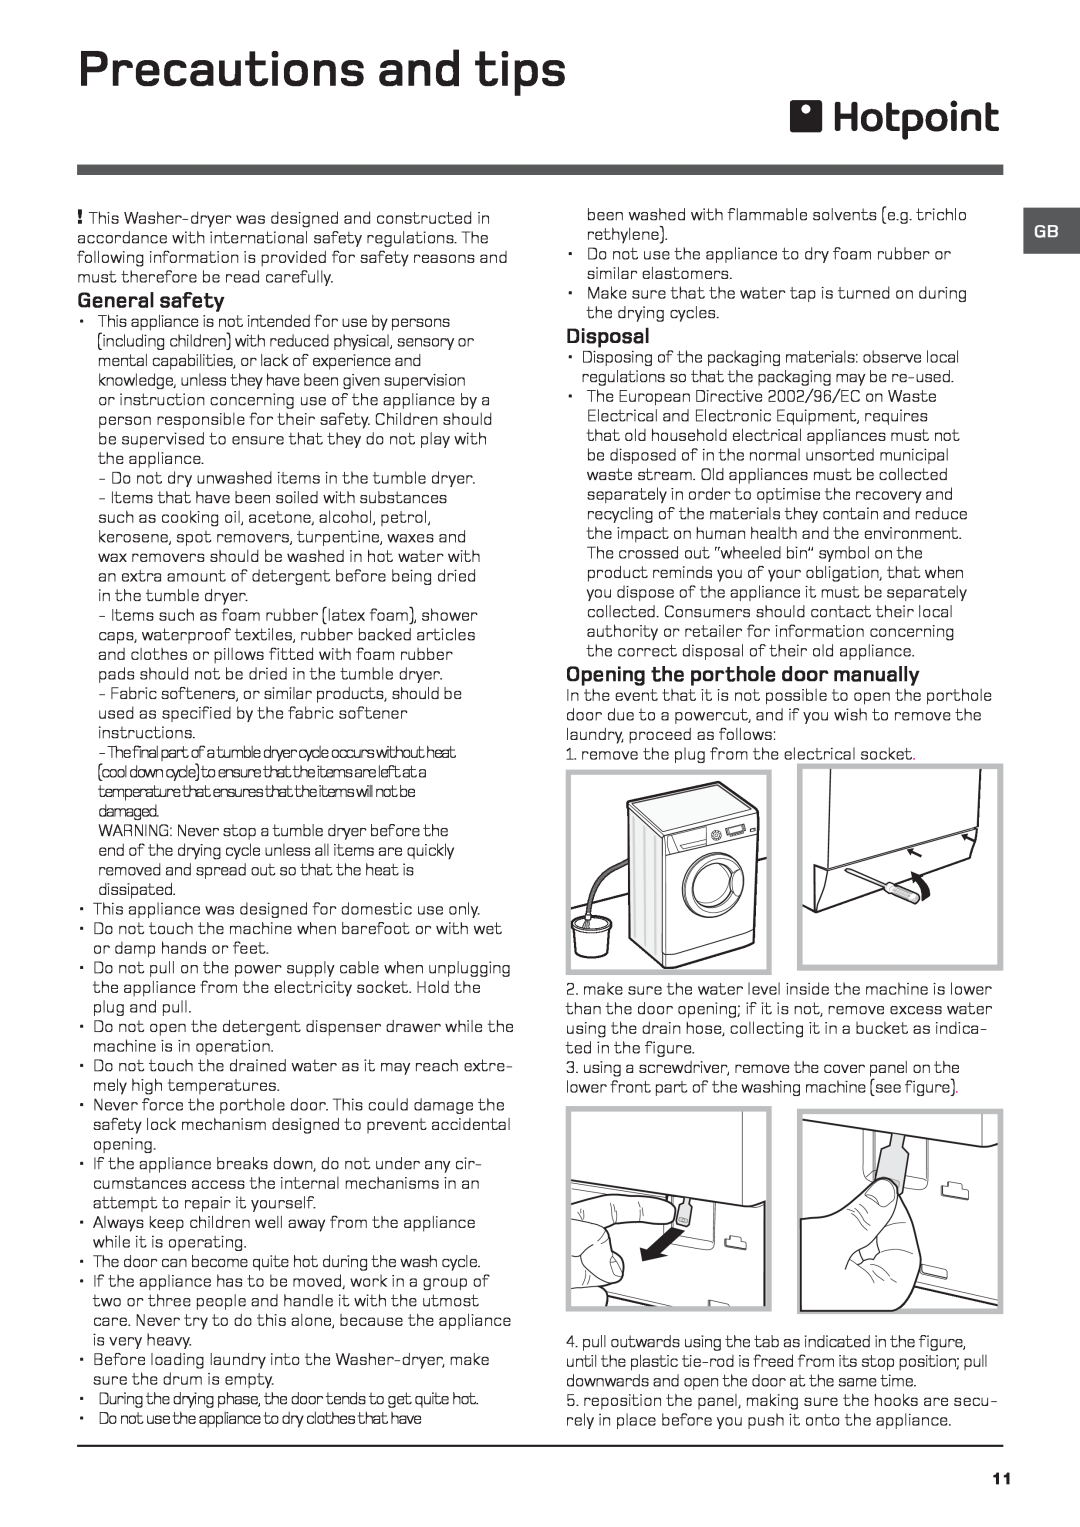 Hotpoint WDD instruction manual Precautions and tips, General safety, Disposal, Opening the porthole door manually 